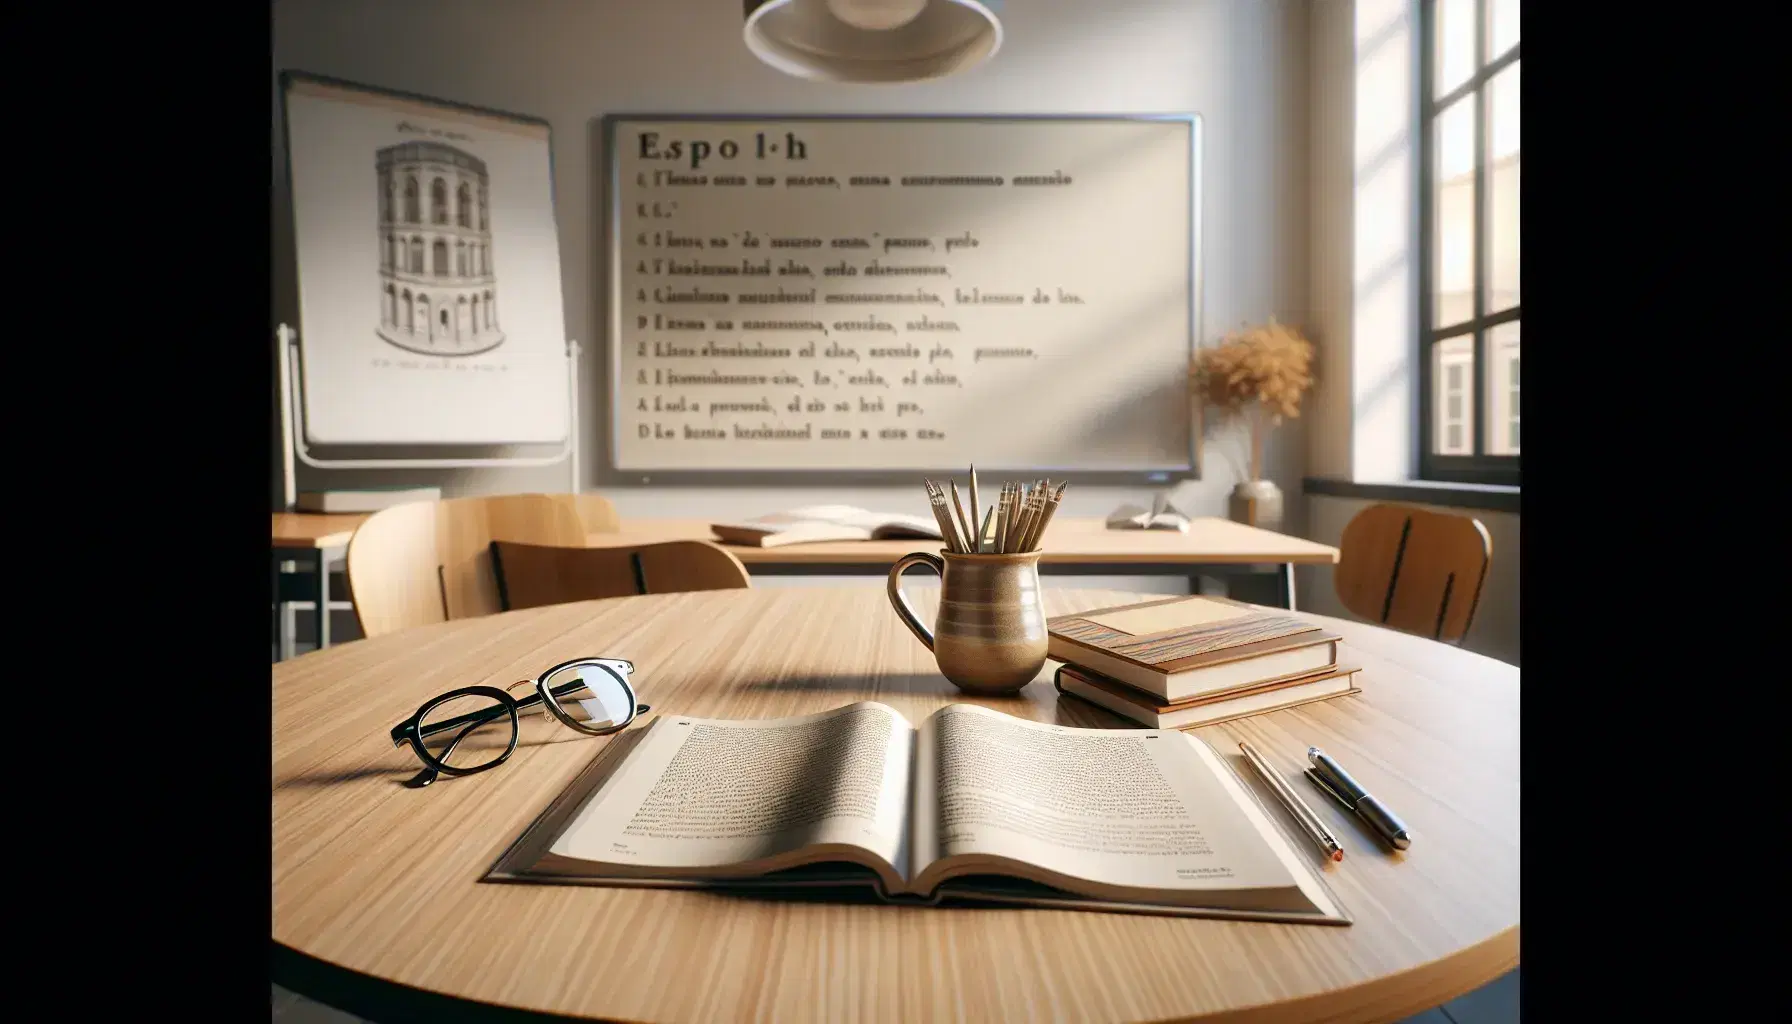 Spanish language classroom with an open textbook on a round wooden table, black-framed eyeglasses, a blank whiteboard, and sunlight streaming through a window.